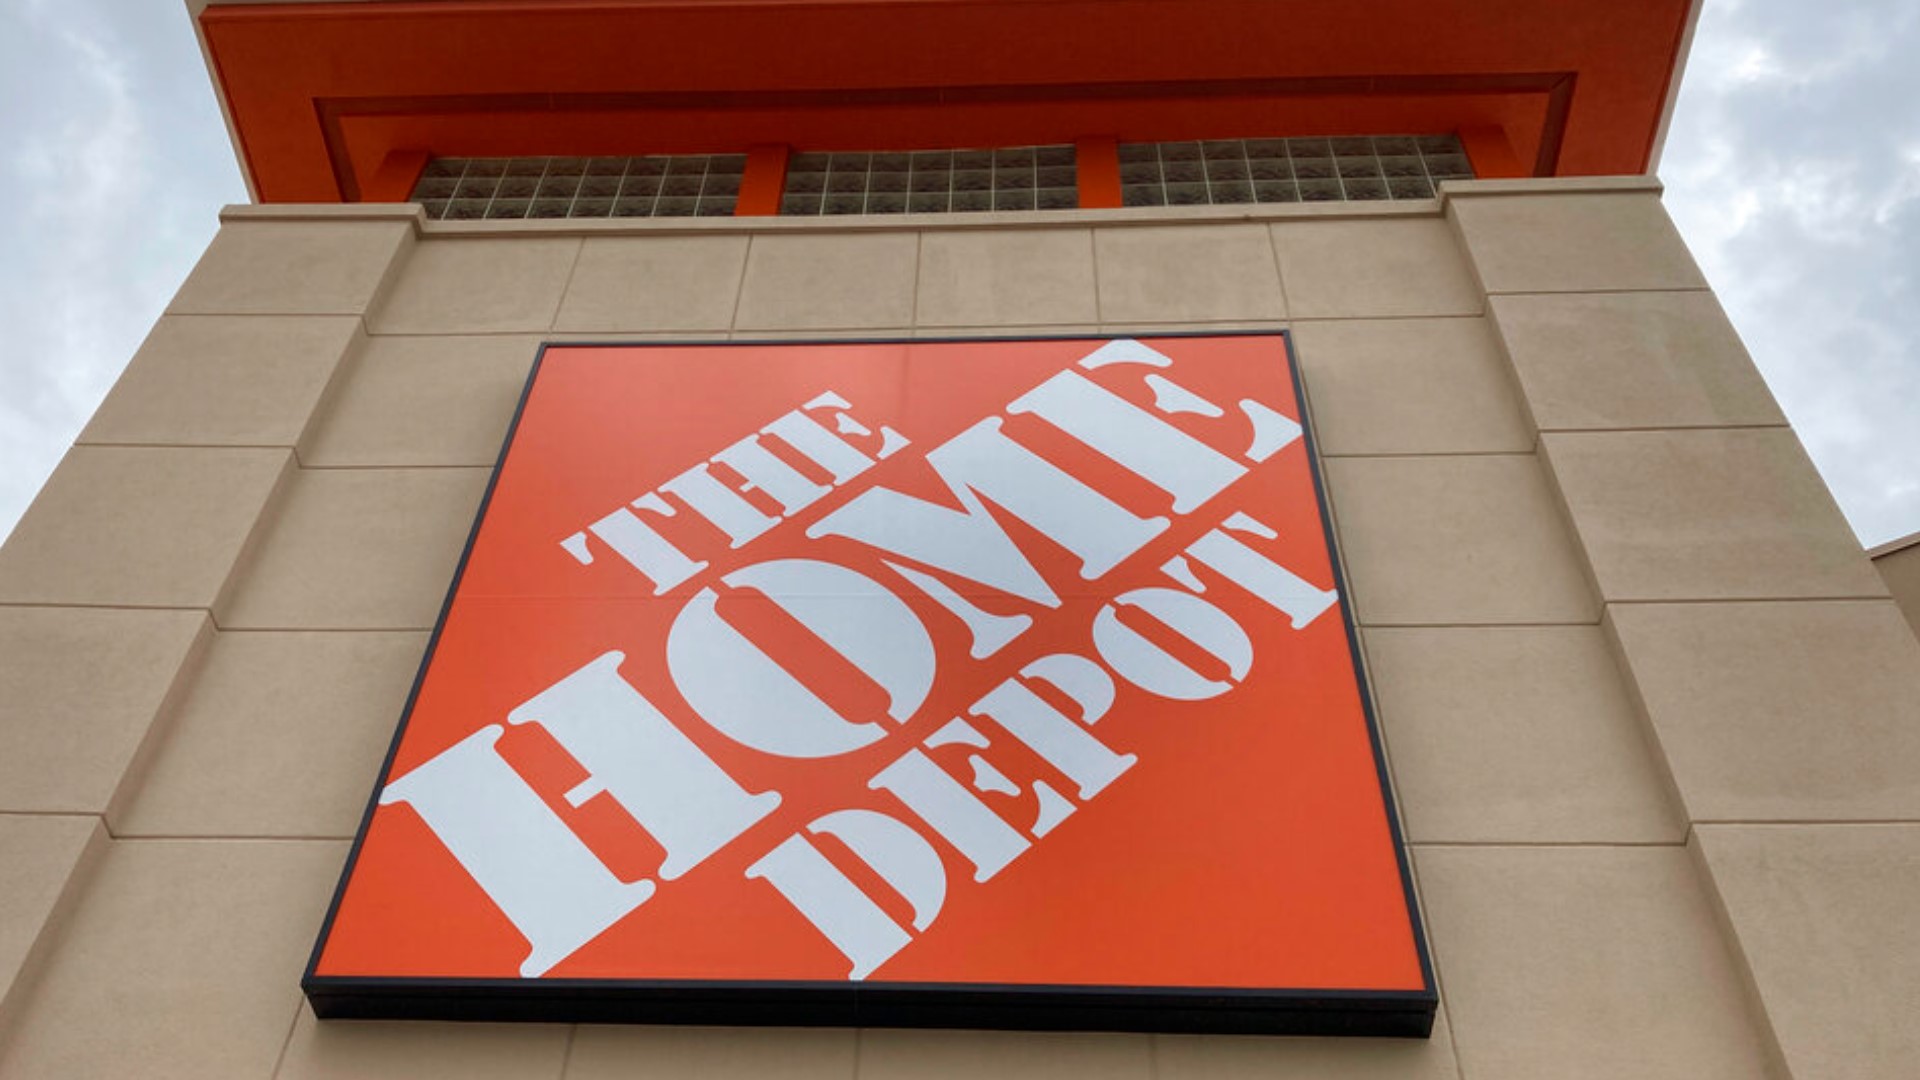 The Home Depot said in a statement to 11Alive on Friday that they had "eliminated a very small number of non-store roles."